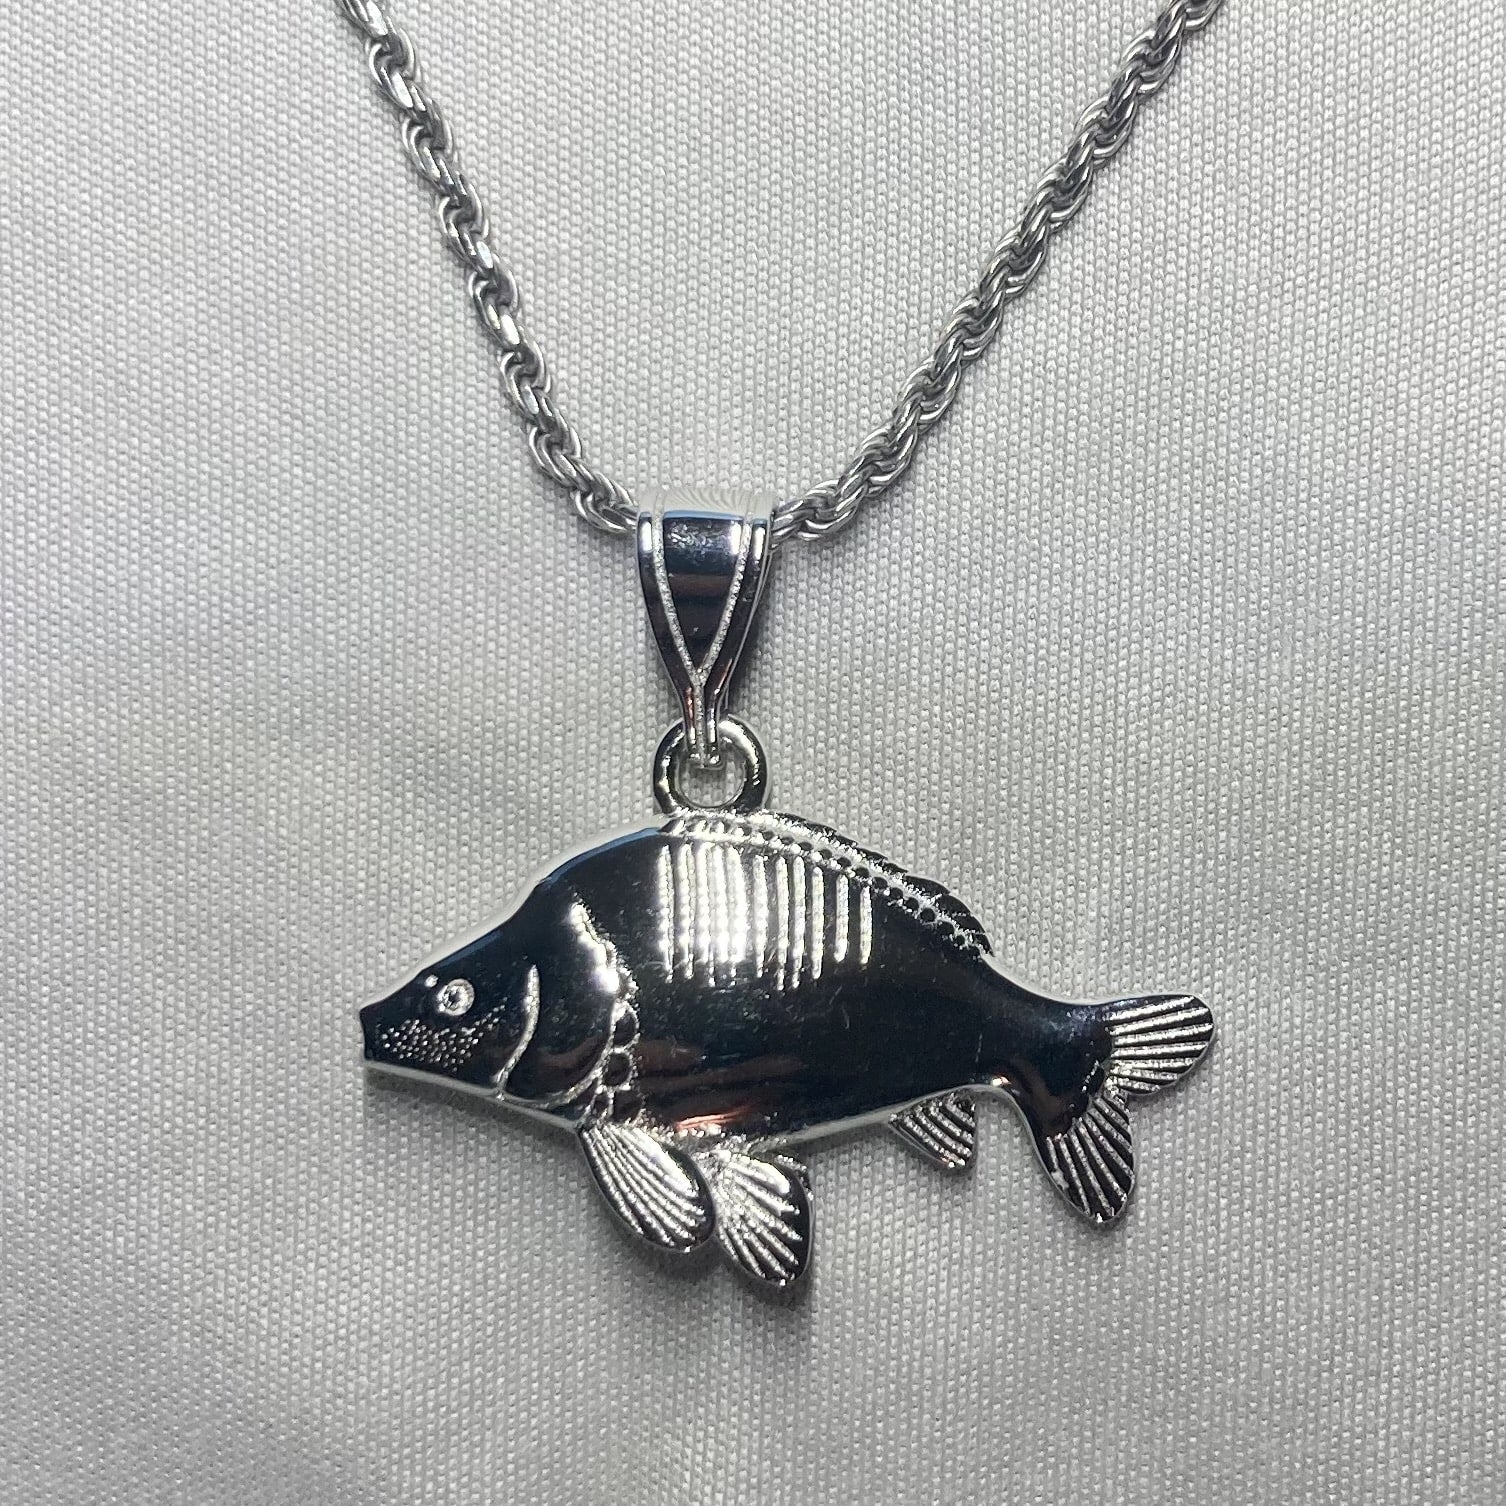 carp - anglers Fisher for necklace – & Necklace Urban